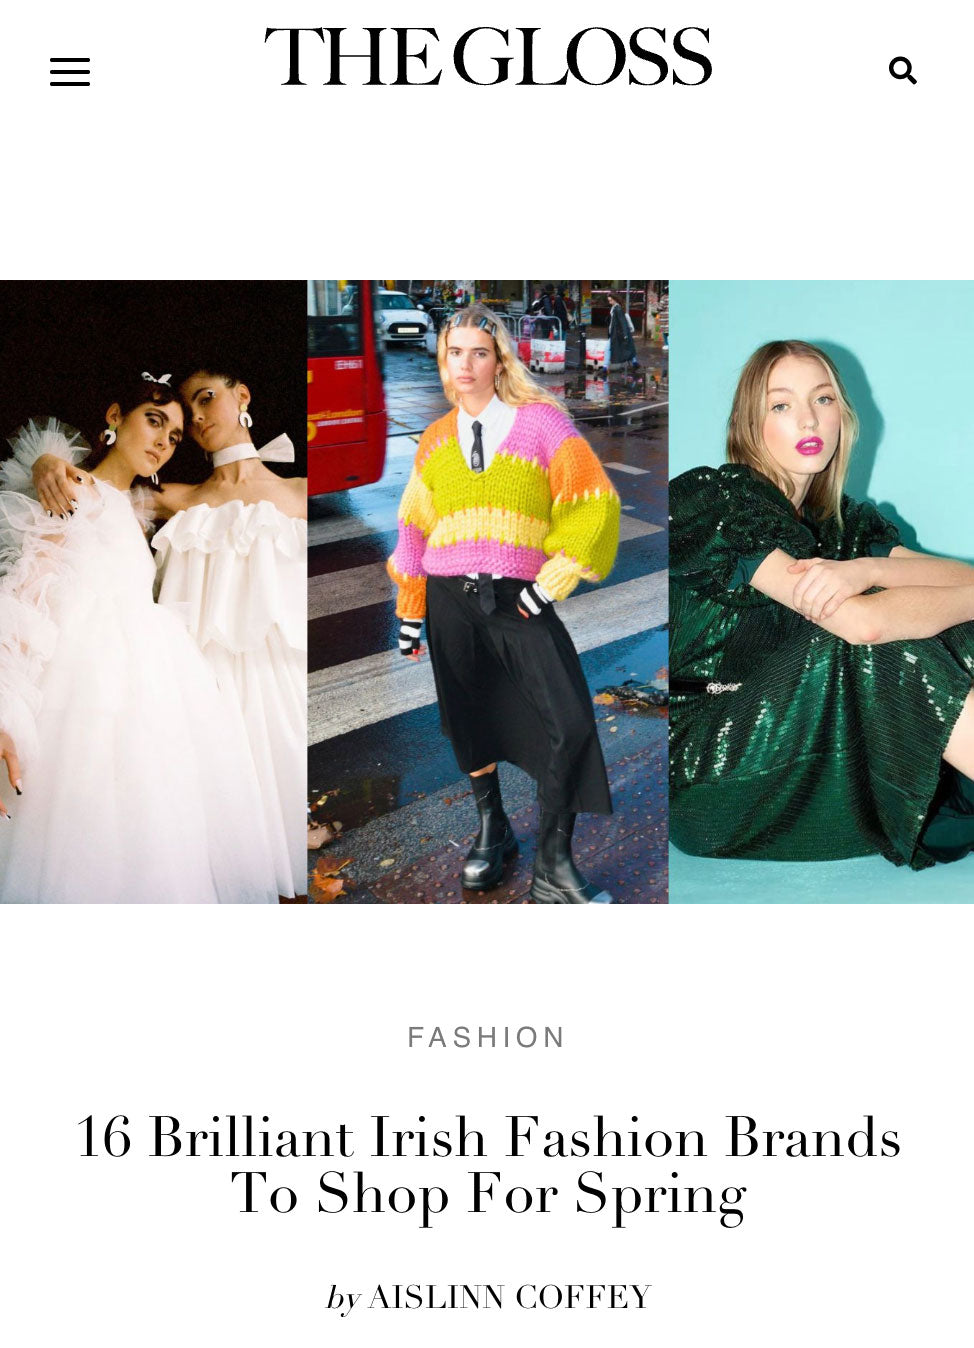 The Gloss - 16 Brilliant Irish Fashion Brands To Shop For Spring 3rd April 2023